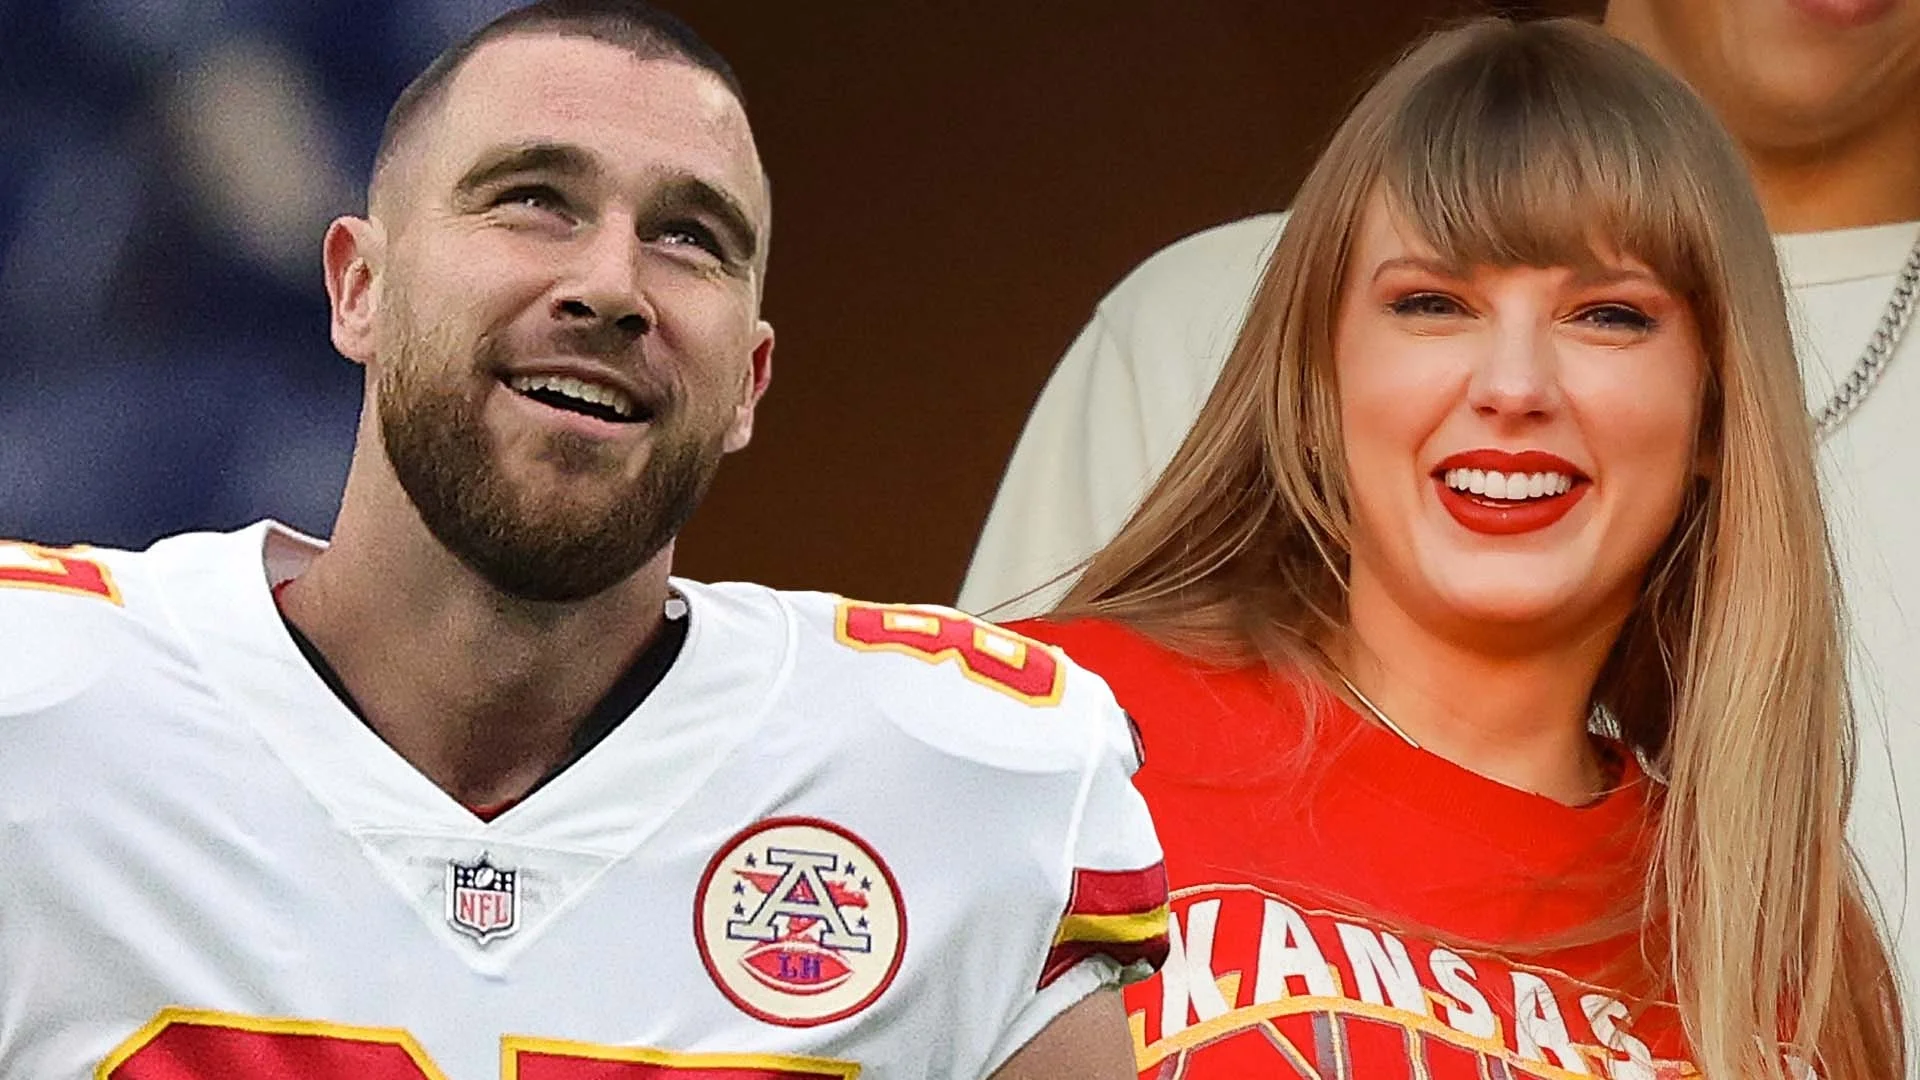 Travis Kelce: Never listen to Haters, I choose you. and I'll choose you over and over. without pause, without a doubt, I'll keep choosing you, Travis kelce sent a heart warming message to Taylor Swift against the haters that are saying He is cheating her(Tay).